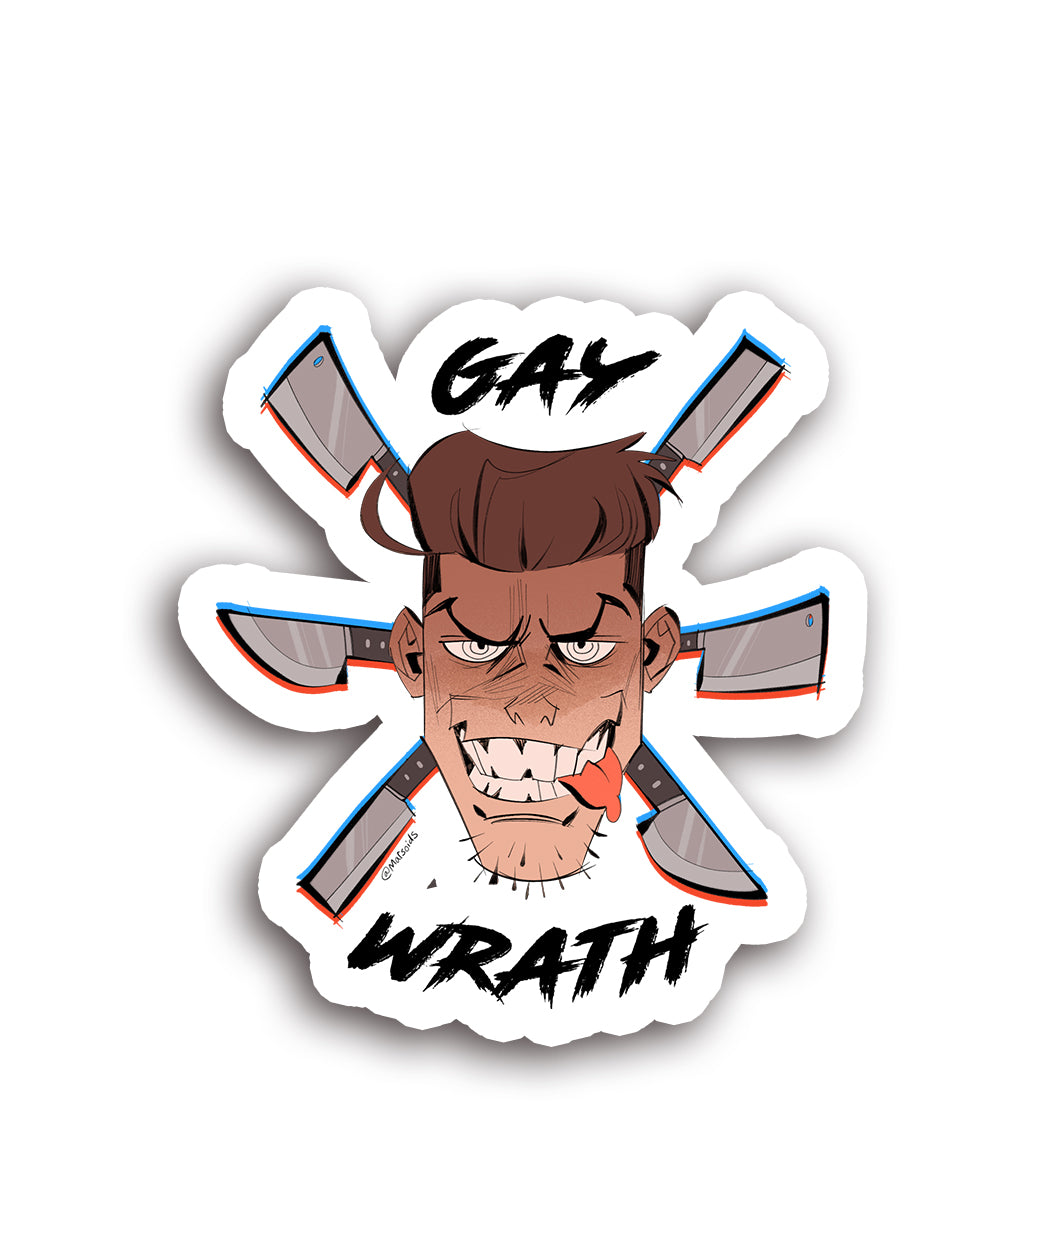 A sticker of a person with their teeth barred, their tongue hanging out and knives coming from behind their head that says 